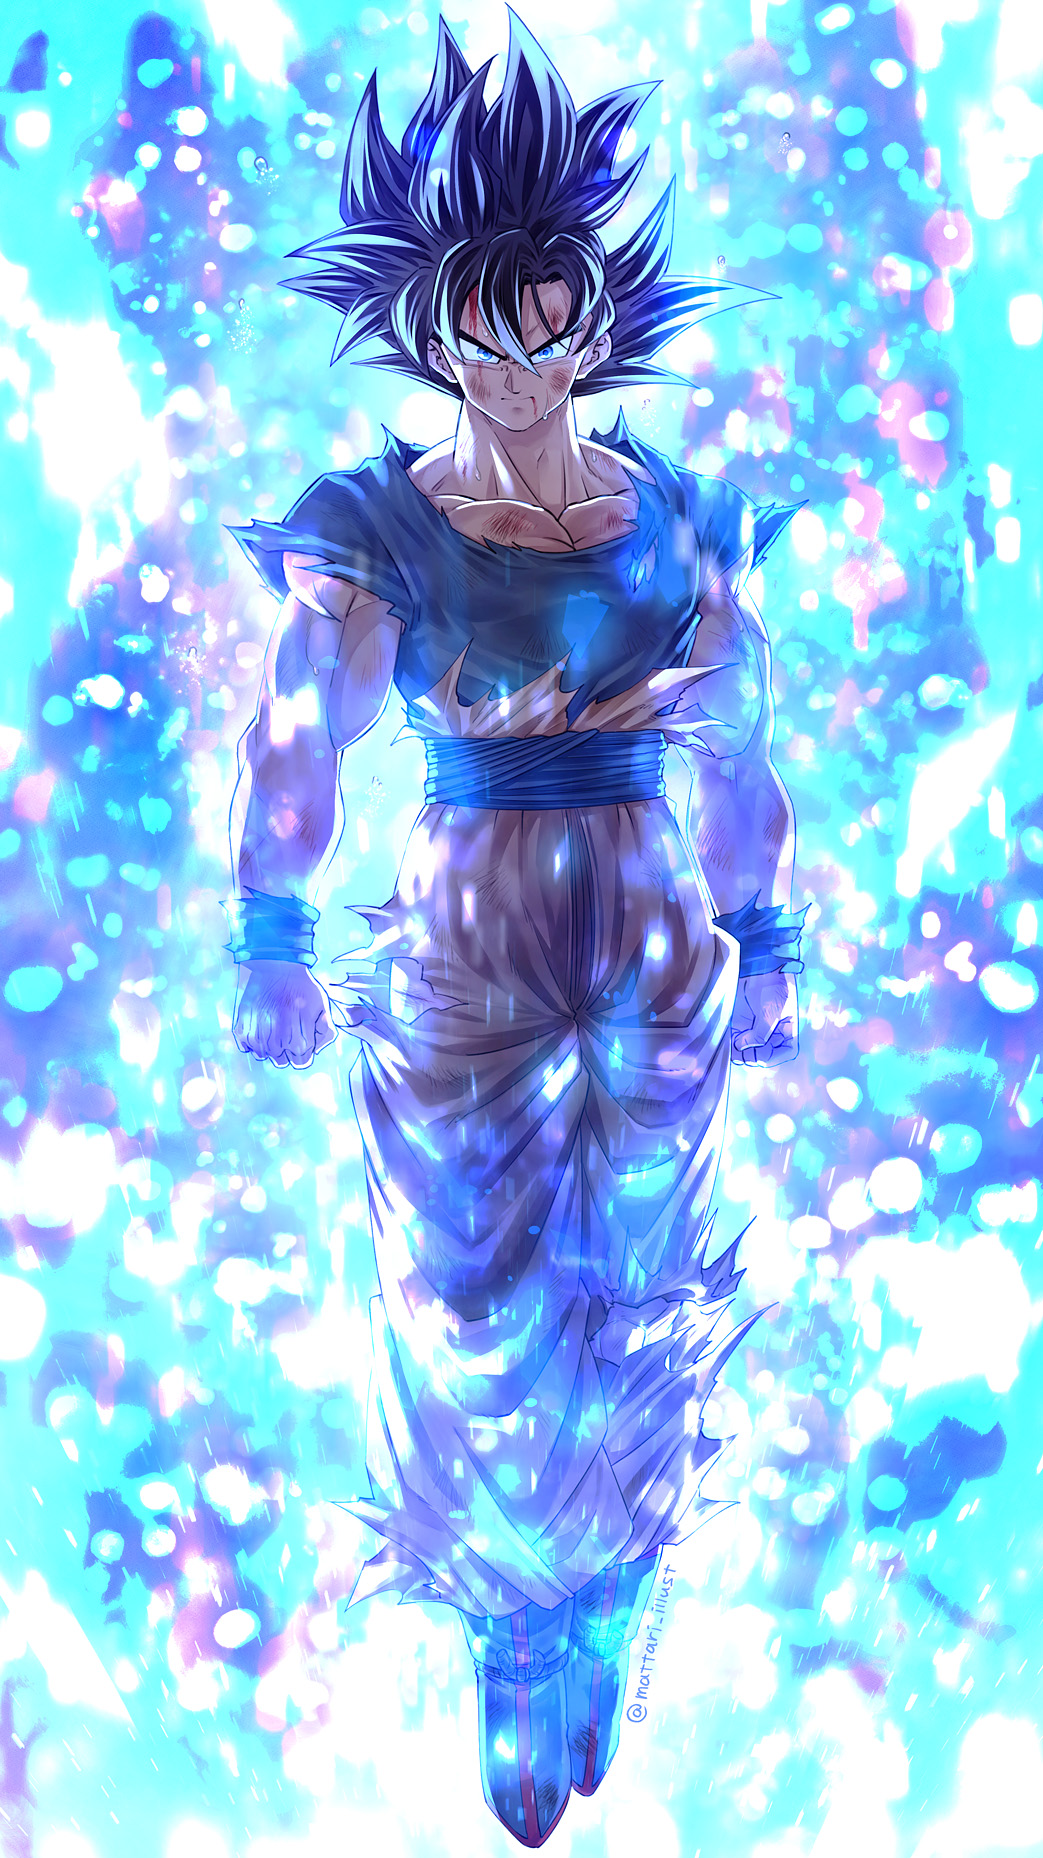 1boy bangs black_hair blood blood_from_mouth blue_eyes bruise bruise_on_face clenched_hands collarbone dragon_ball dragon_ball_super full_body grey_shirt hair_between_eyes highres injury long_hair looking_at_viewer male_focus mattari_illust orange_pants shirt short_sleeves solo son_goku spiky_hair torn_clothes torn_shirt twitter_username ultra_instinct